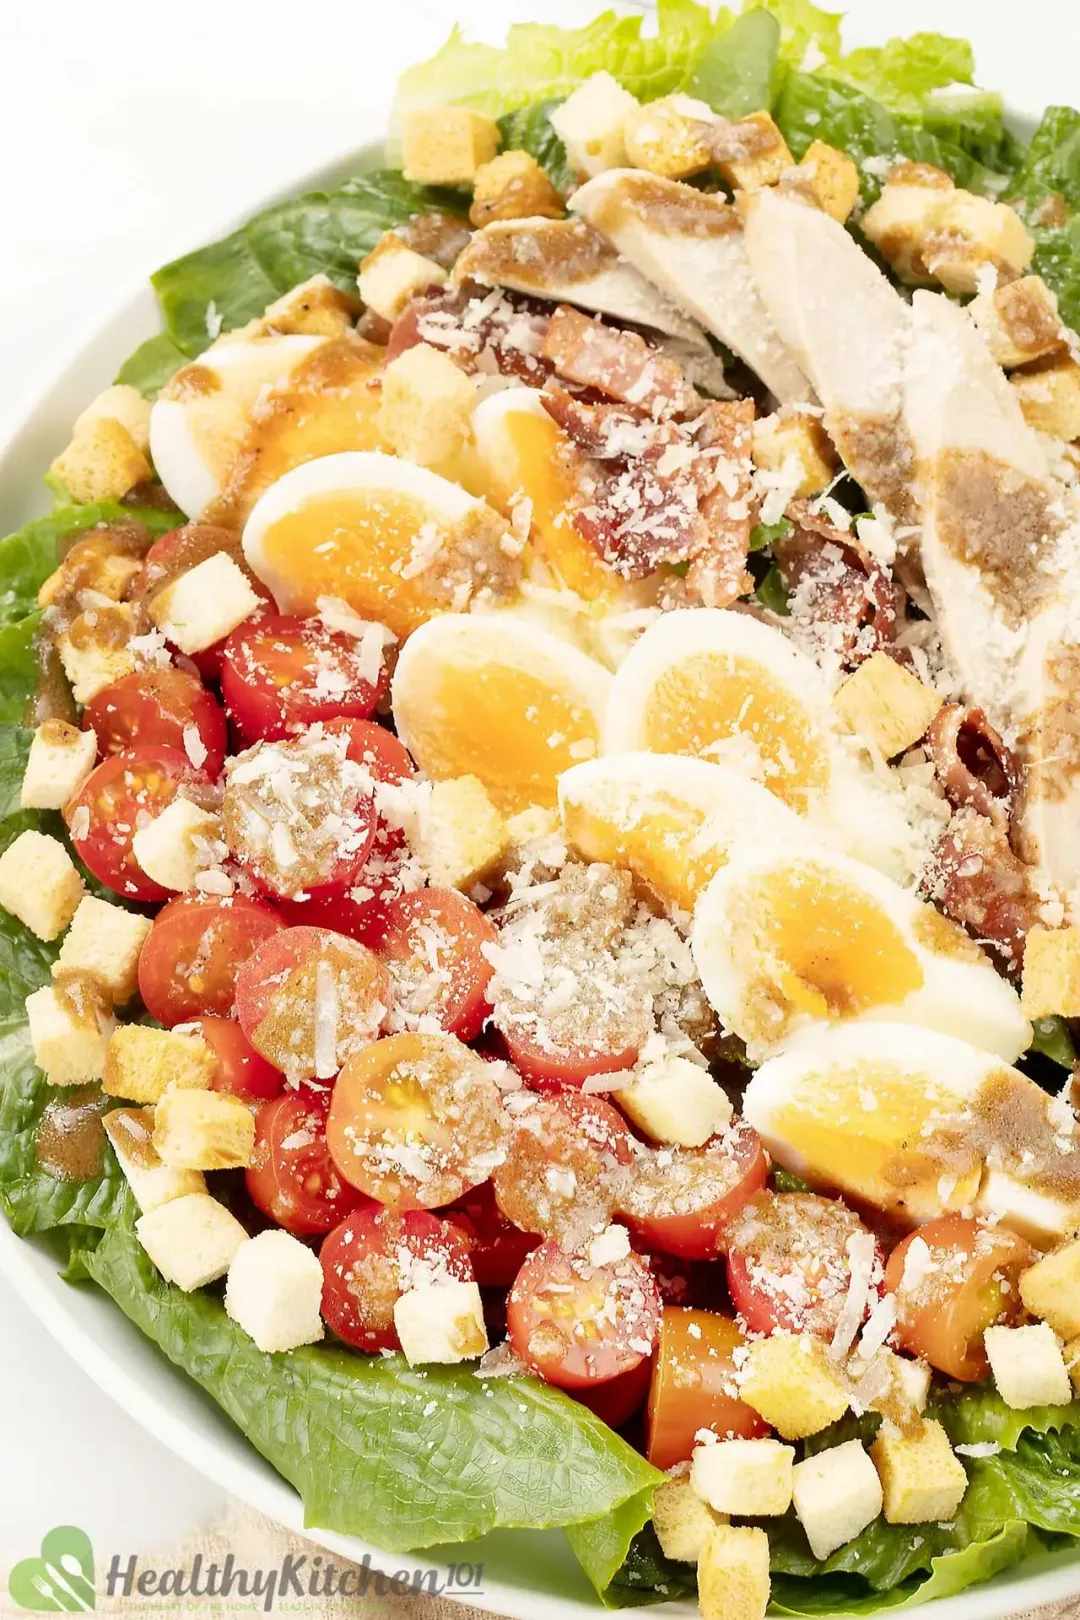 A variety of Caesar salad ingredients on a platter: including grilled chicken, cherry tomatoes, boiled eggs, lettuce